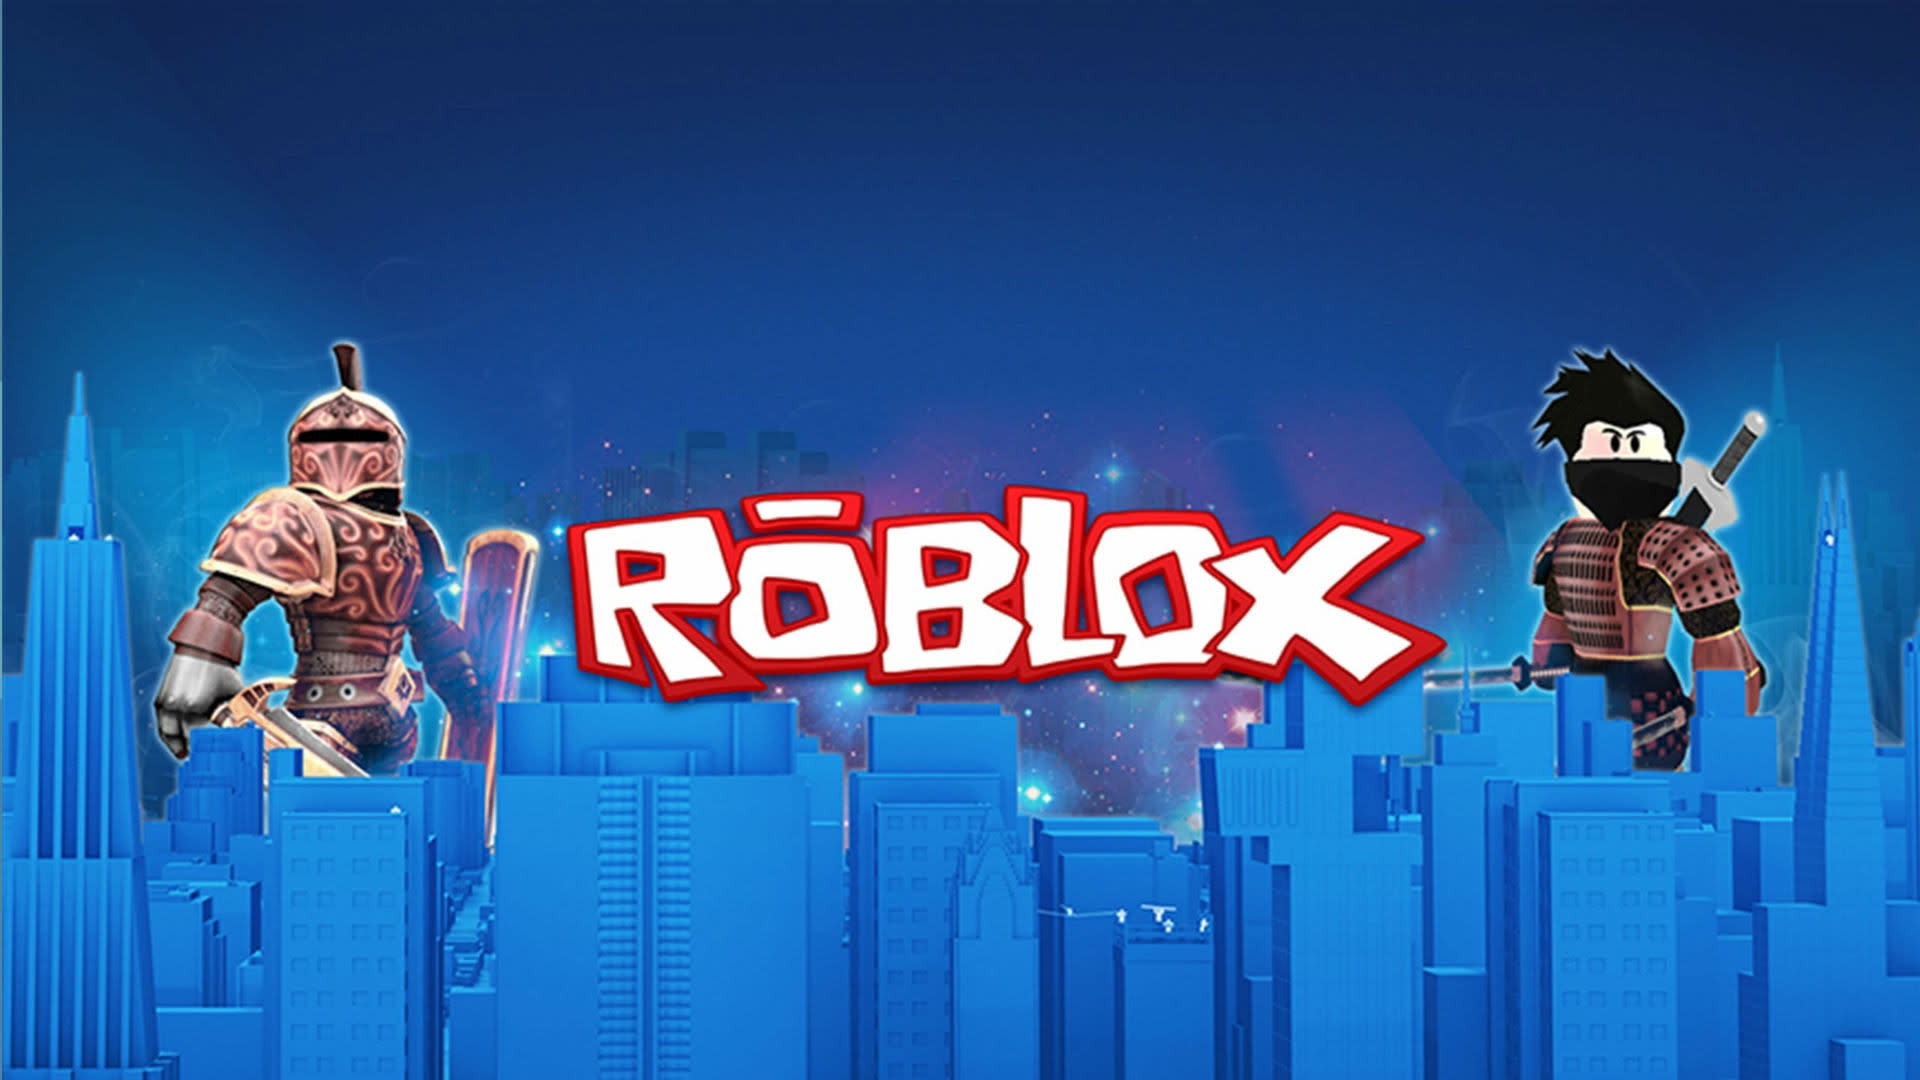 Roblox Enters Vr Space With Cross Platform Support - roblox world zero mounts